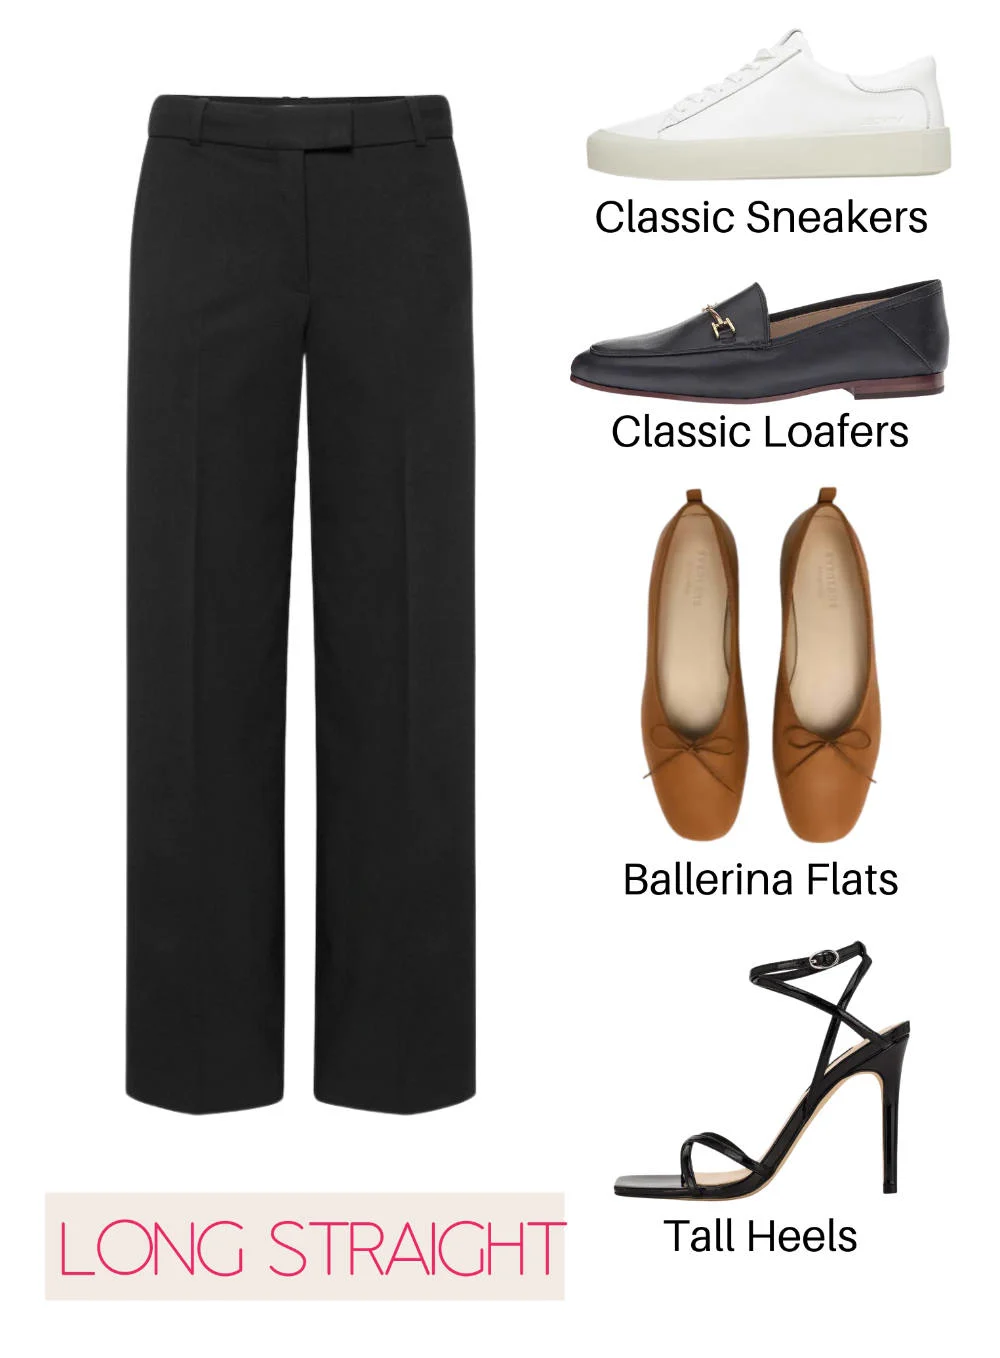 Collage of black long straight leg dress pants with 4 shoes to wear them with.